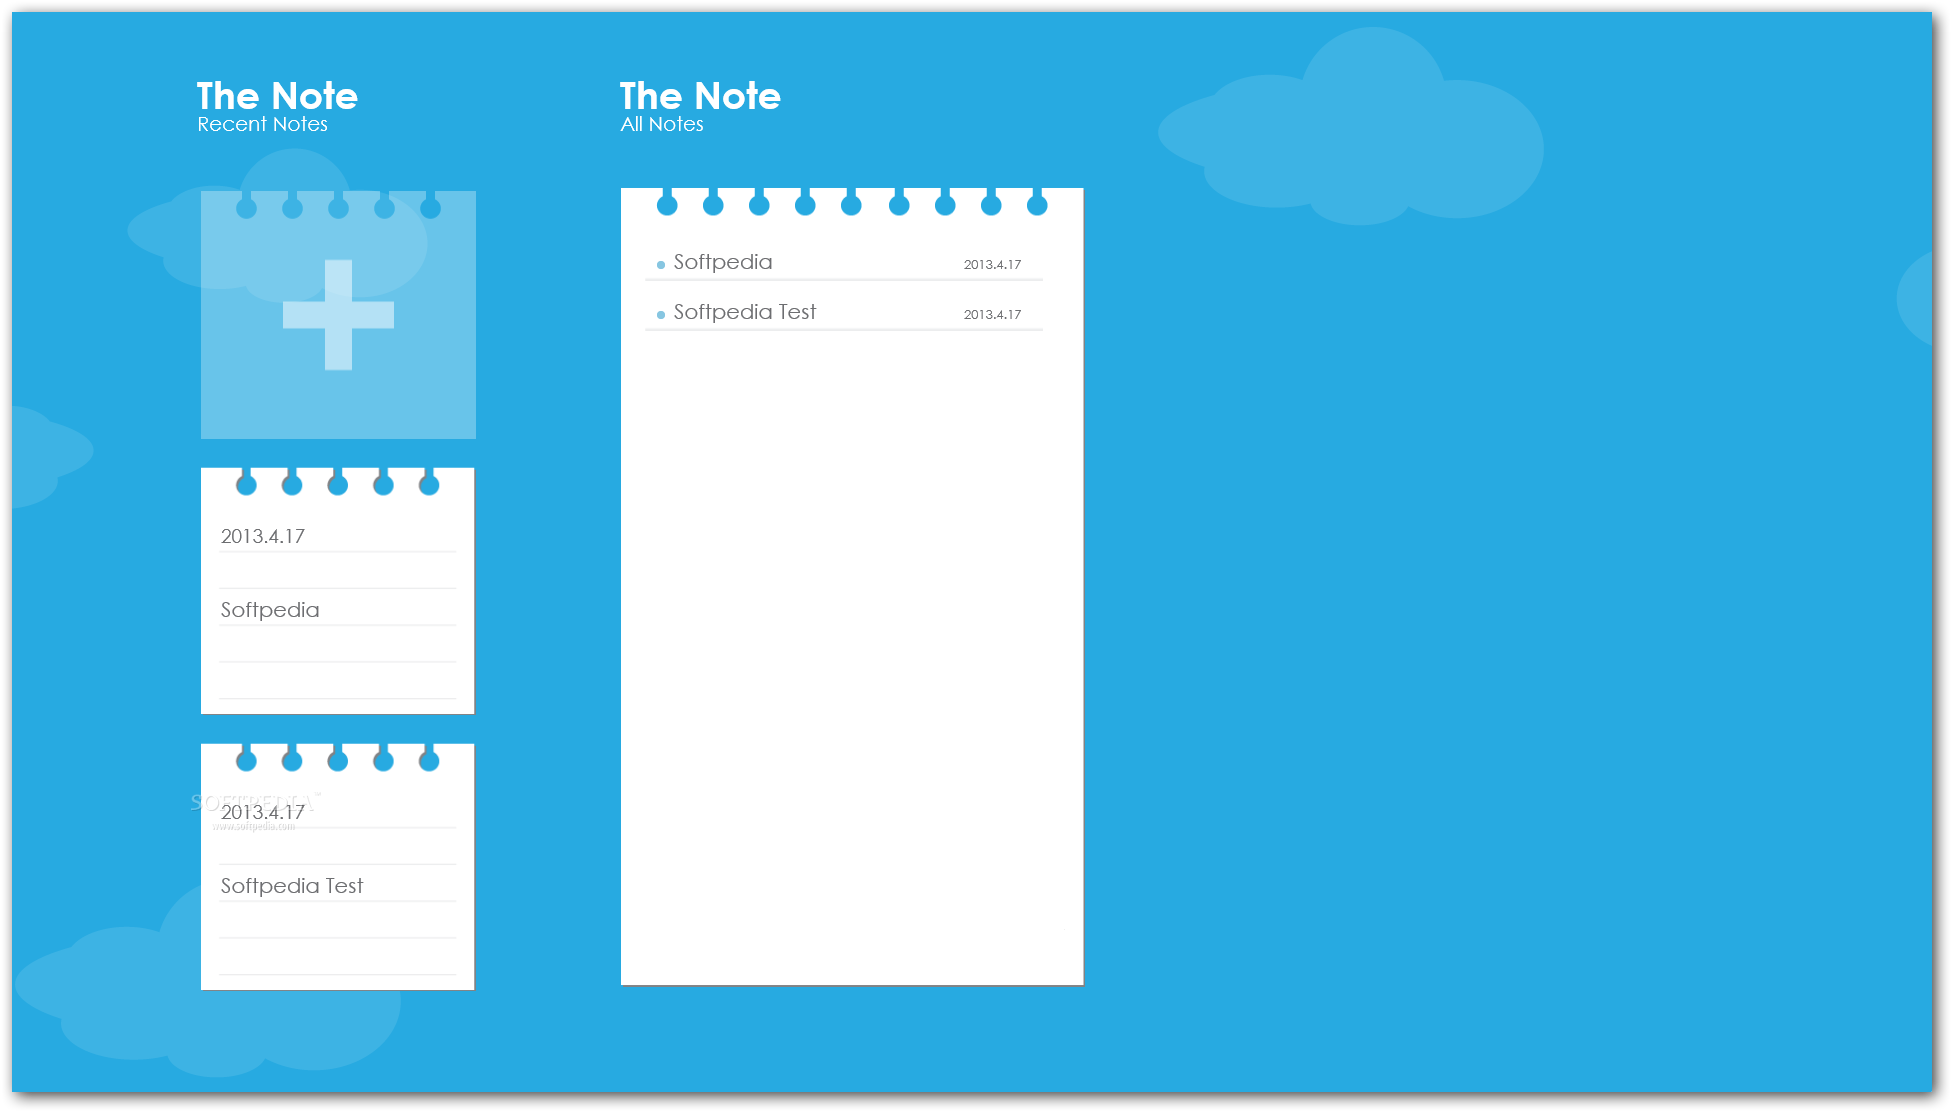 download simple notes for windows